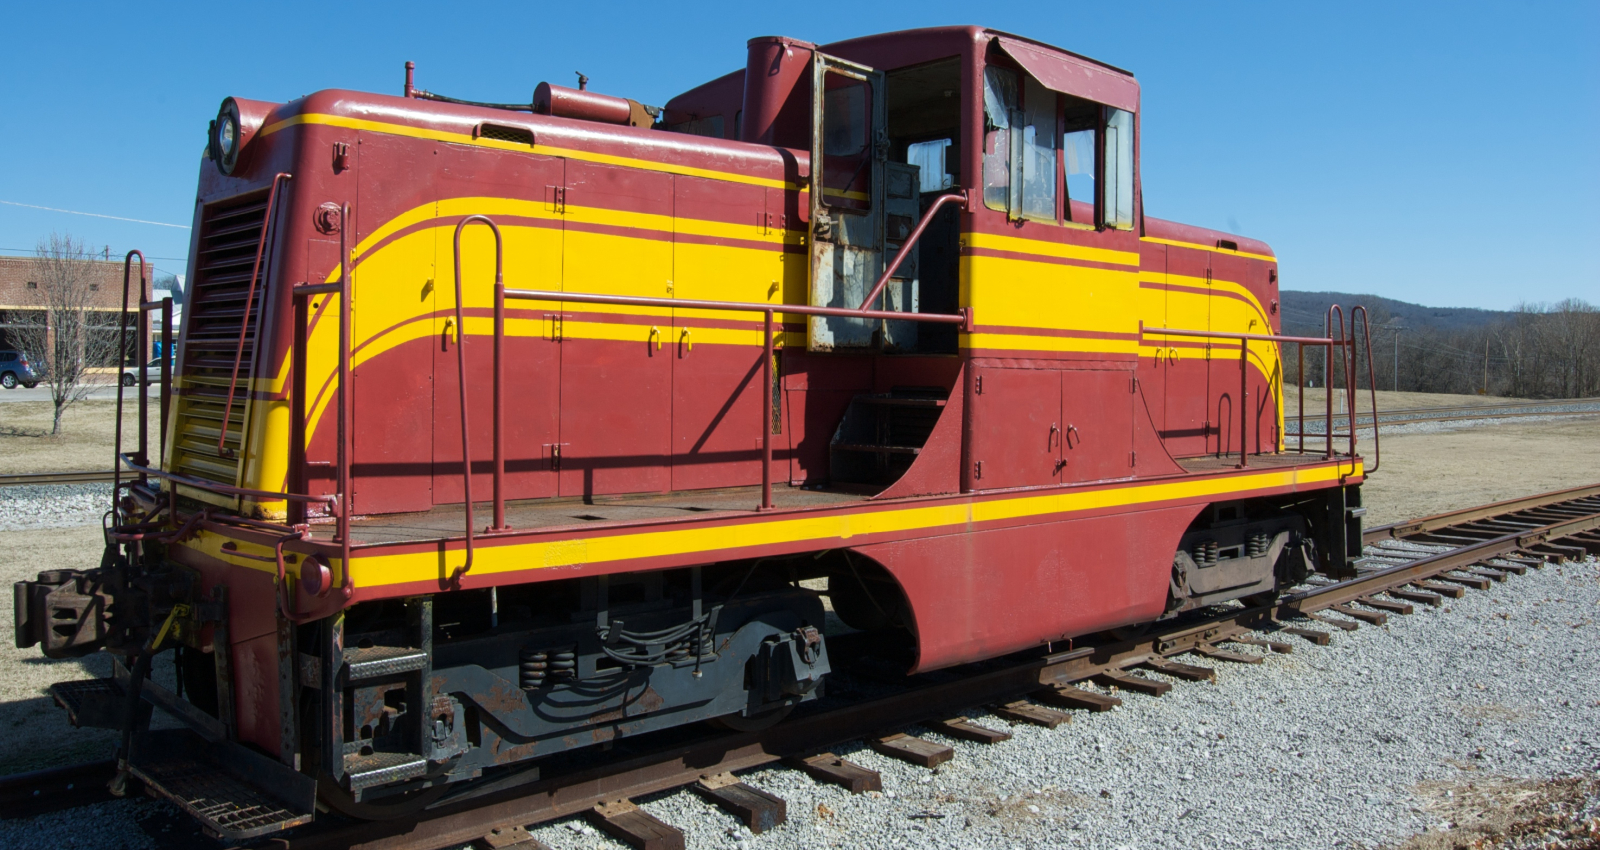 Preserved locomotive in February 2009 at the Cowan Railroad Museum, Tennessee